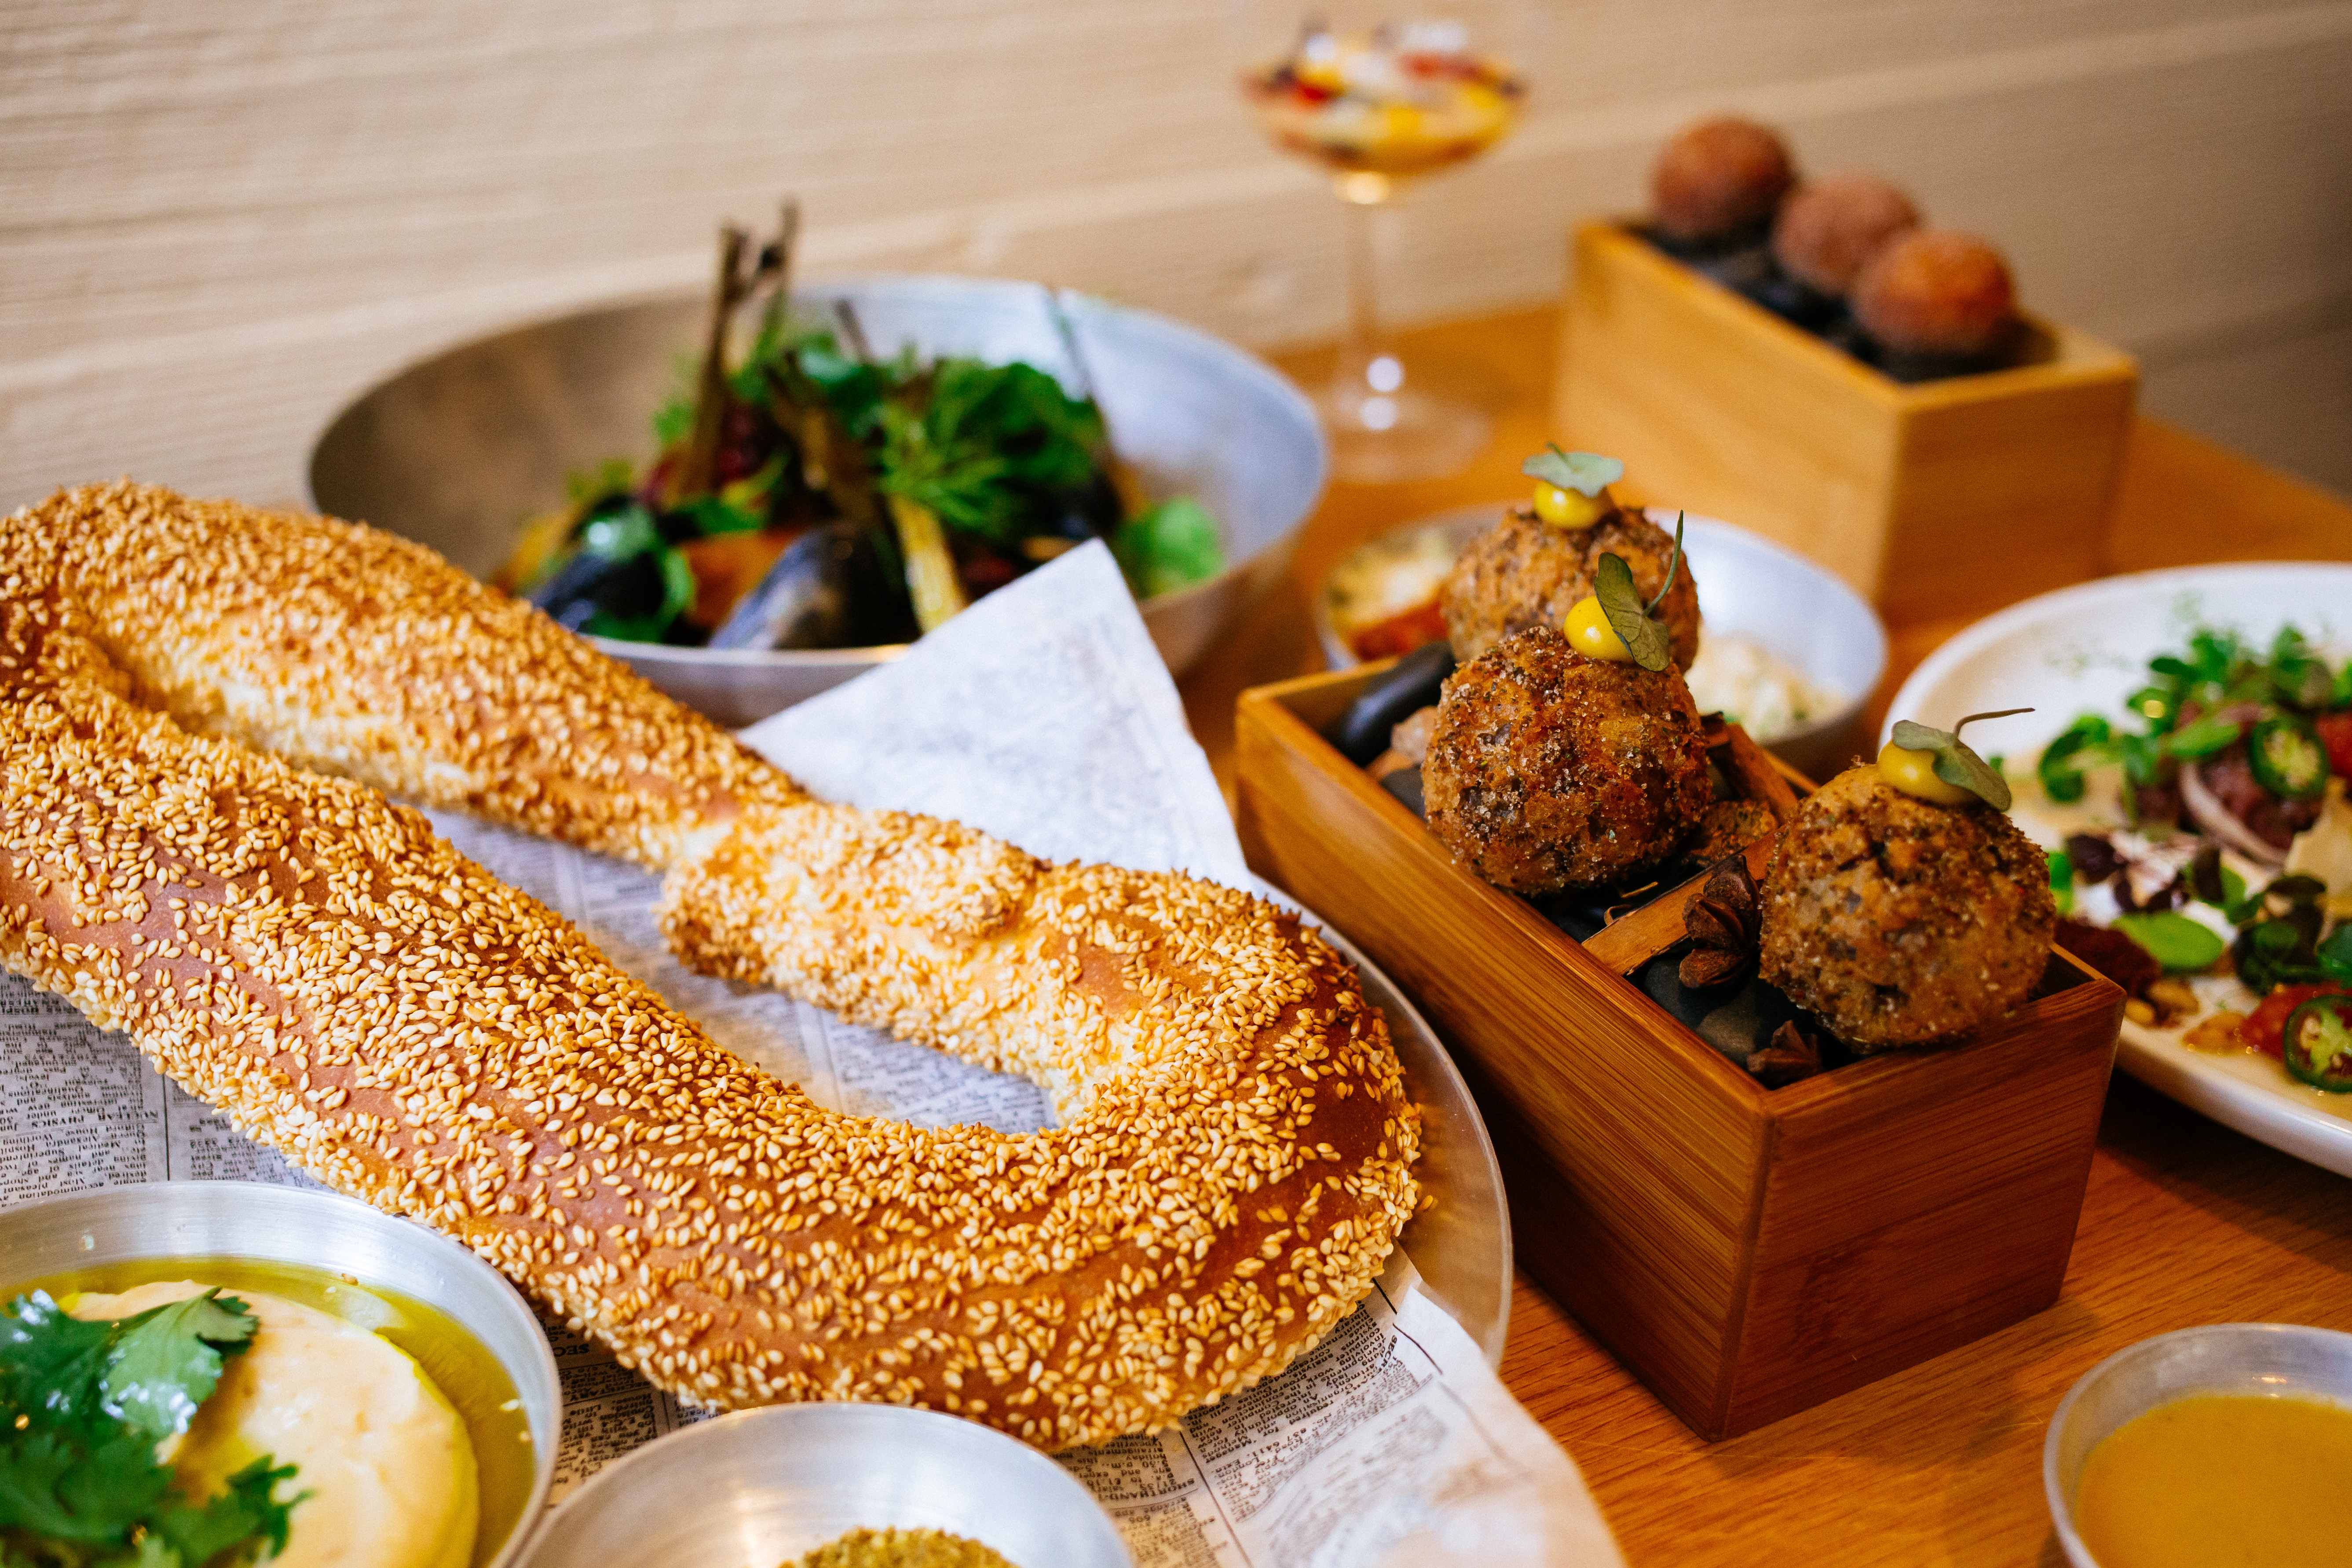 A spread of food from Nur, including a sesame-studded bread product and round balls on wooden boxes.